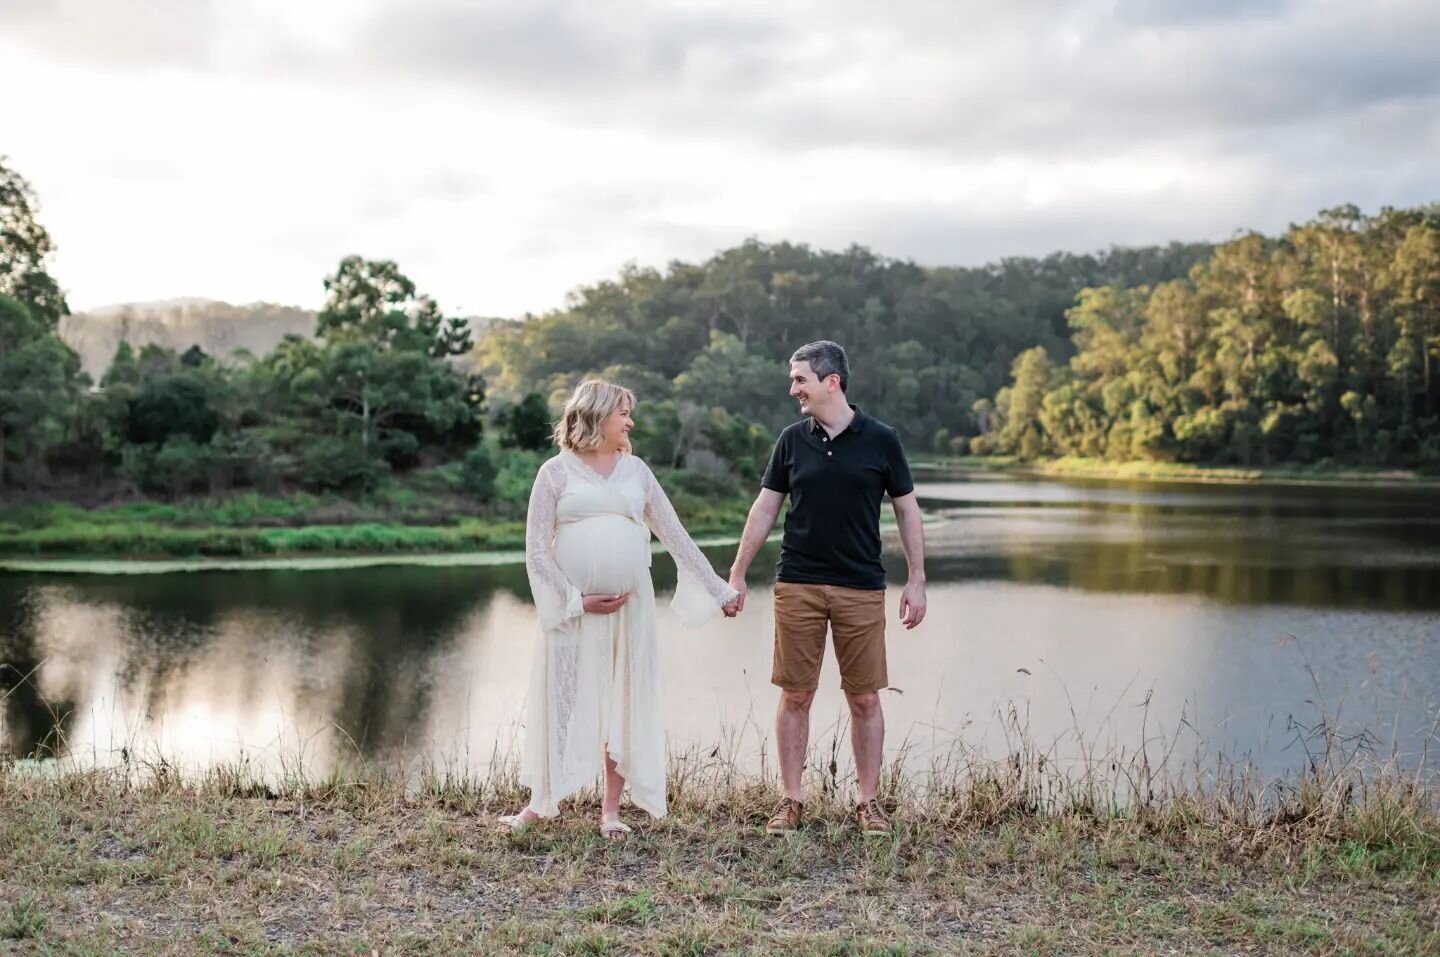 I haven't done a maternity session in a few months, and to say I'm a bit obsessed is an understatement. More baby bumps please!! Can't wait to meet their little man in a few weeks' time at his Fresh48 session 🤩
.
.
.
.
#brisbanebabyphotography #bris